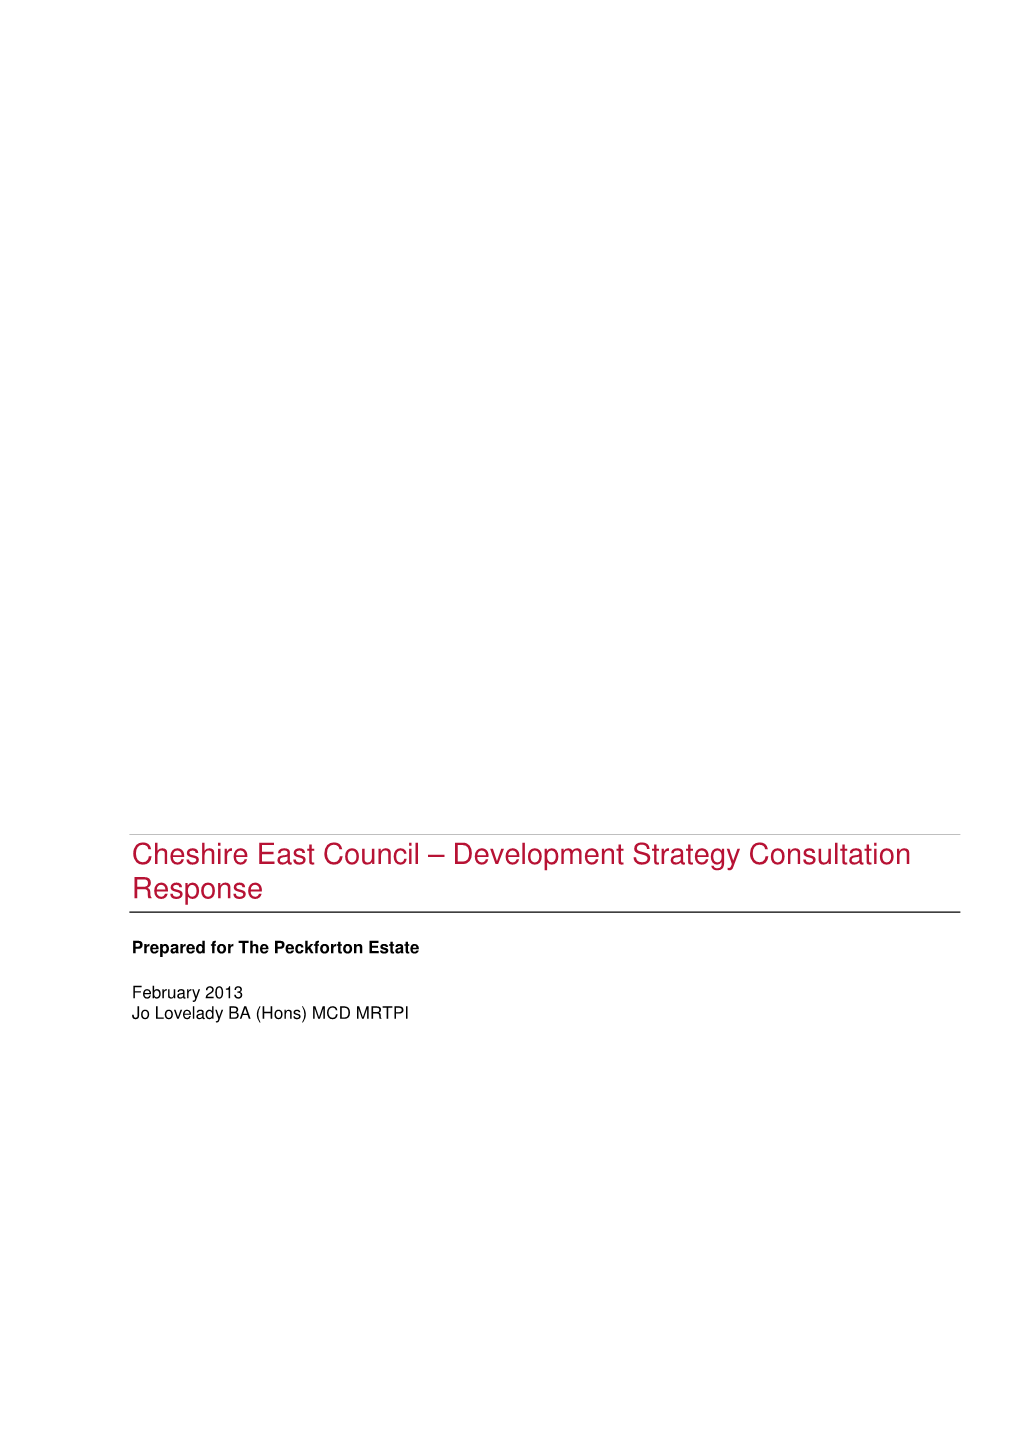 Cheshire East Council – Development Strategy Consultation Response